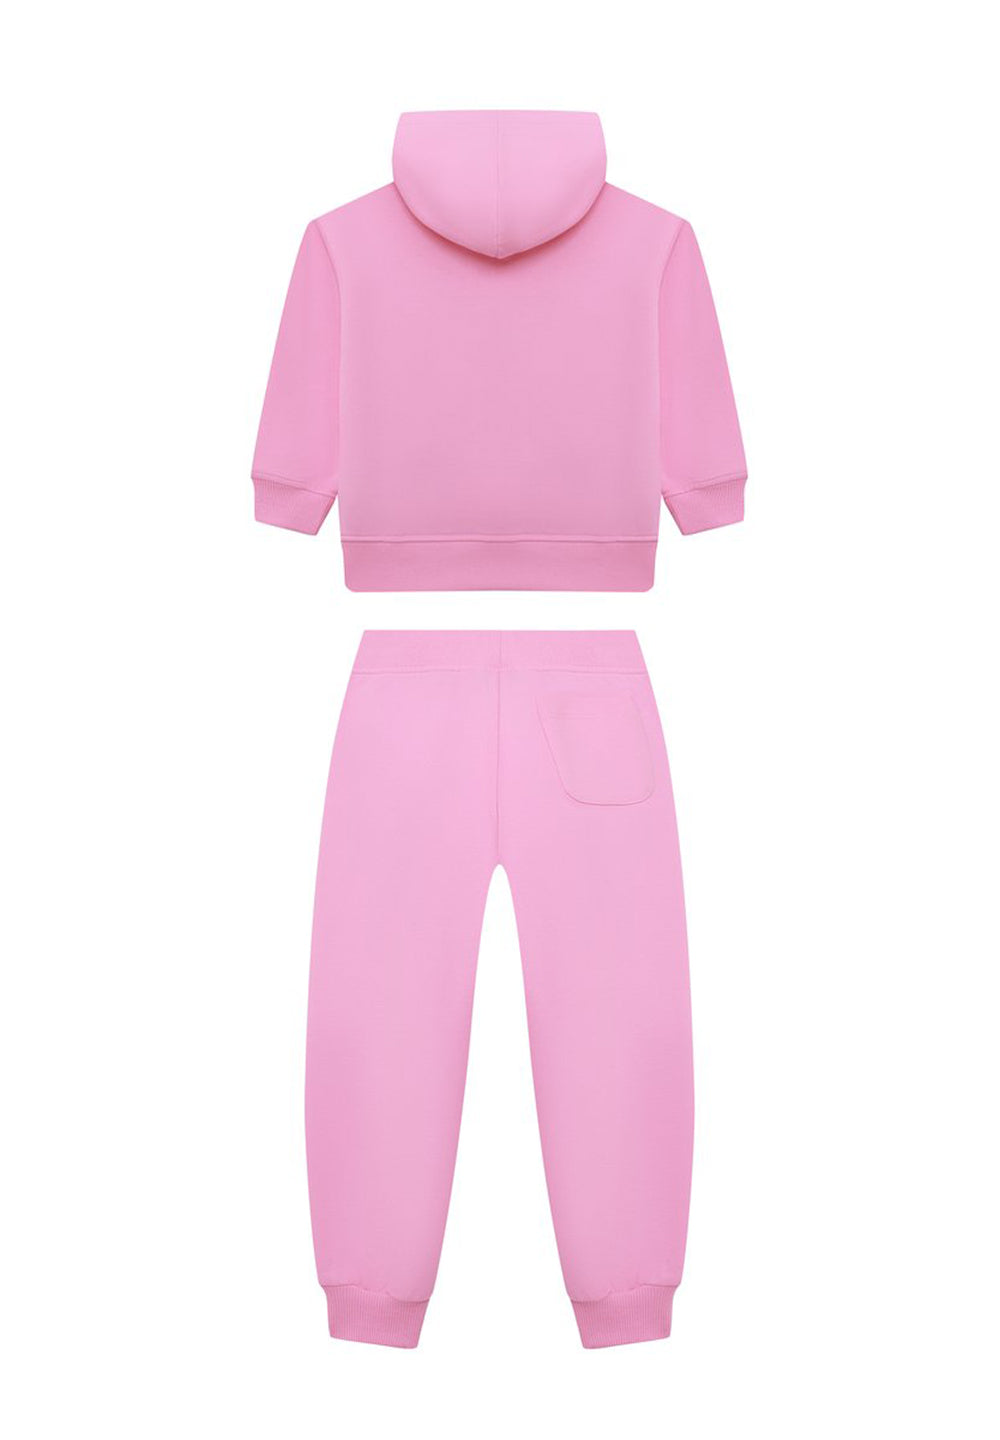 Pink outfit for girls